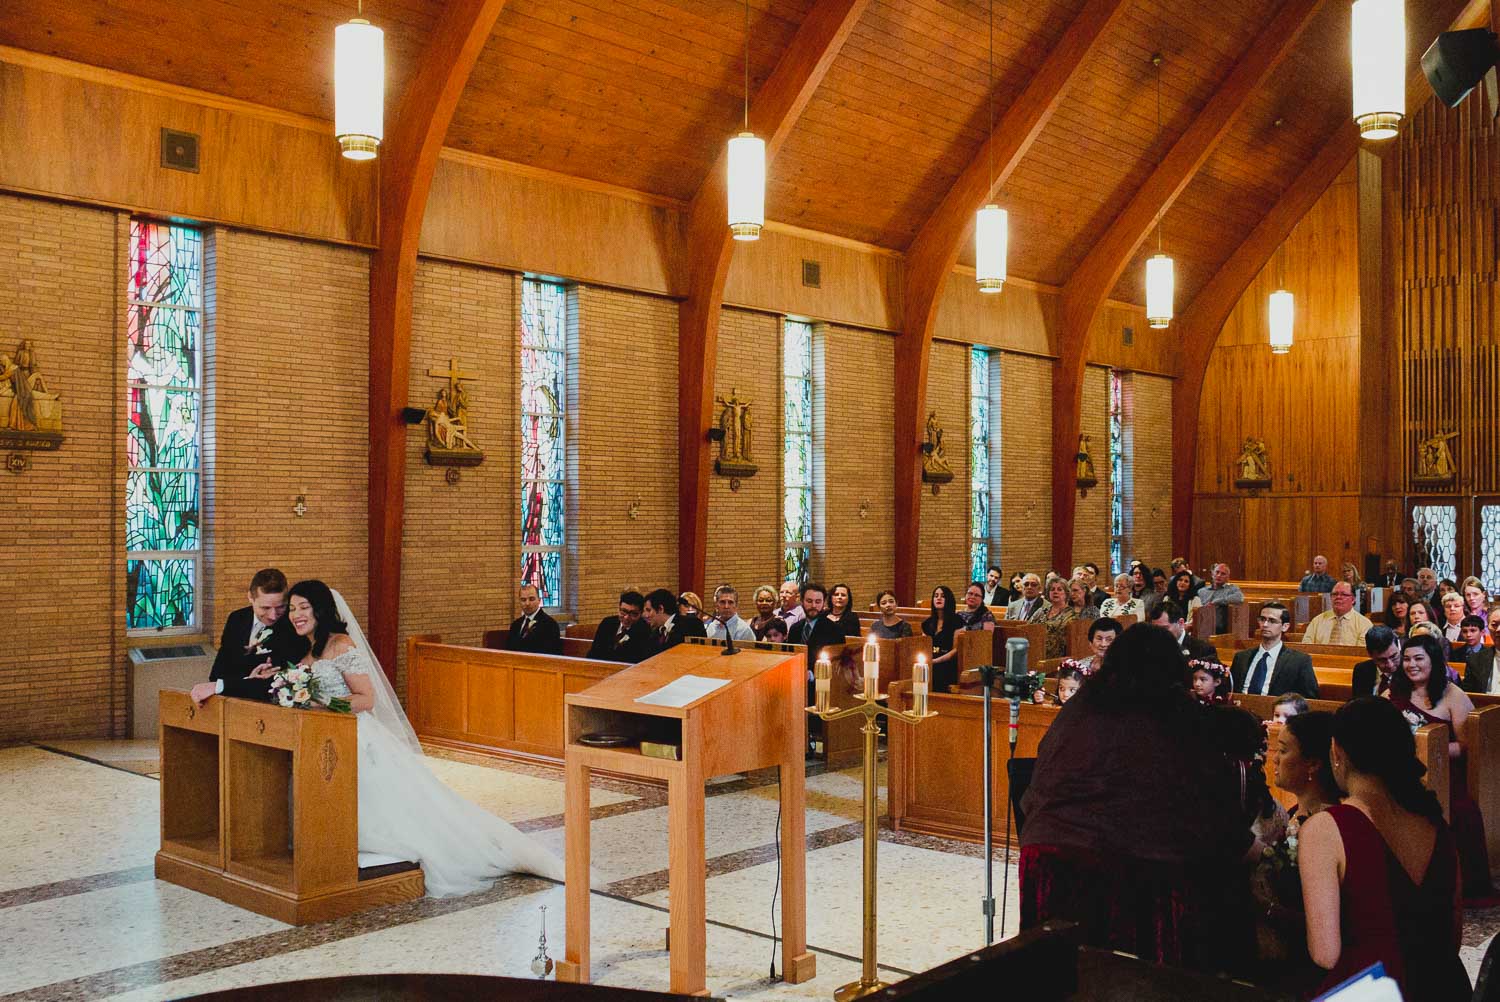 Melody and Alex kneel during wedding ceremony at Immaculate Conception Chapel at Oblate School of Theology -Philip Thomas